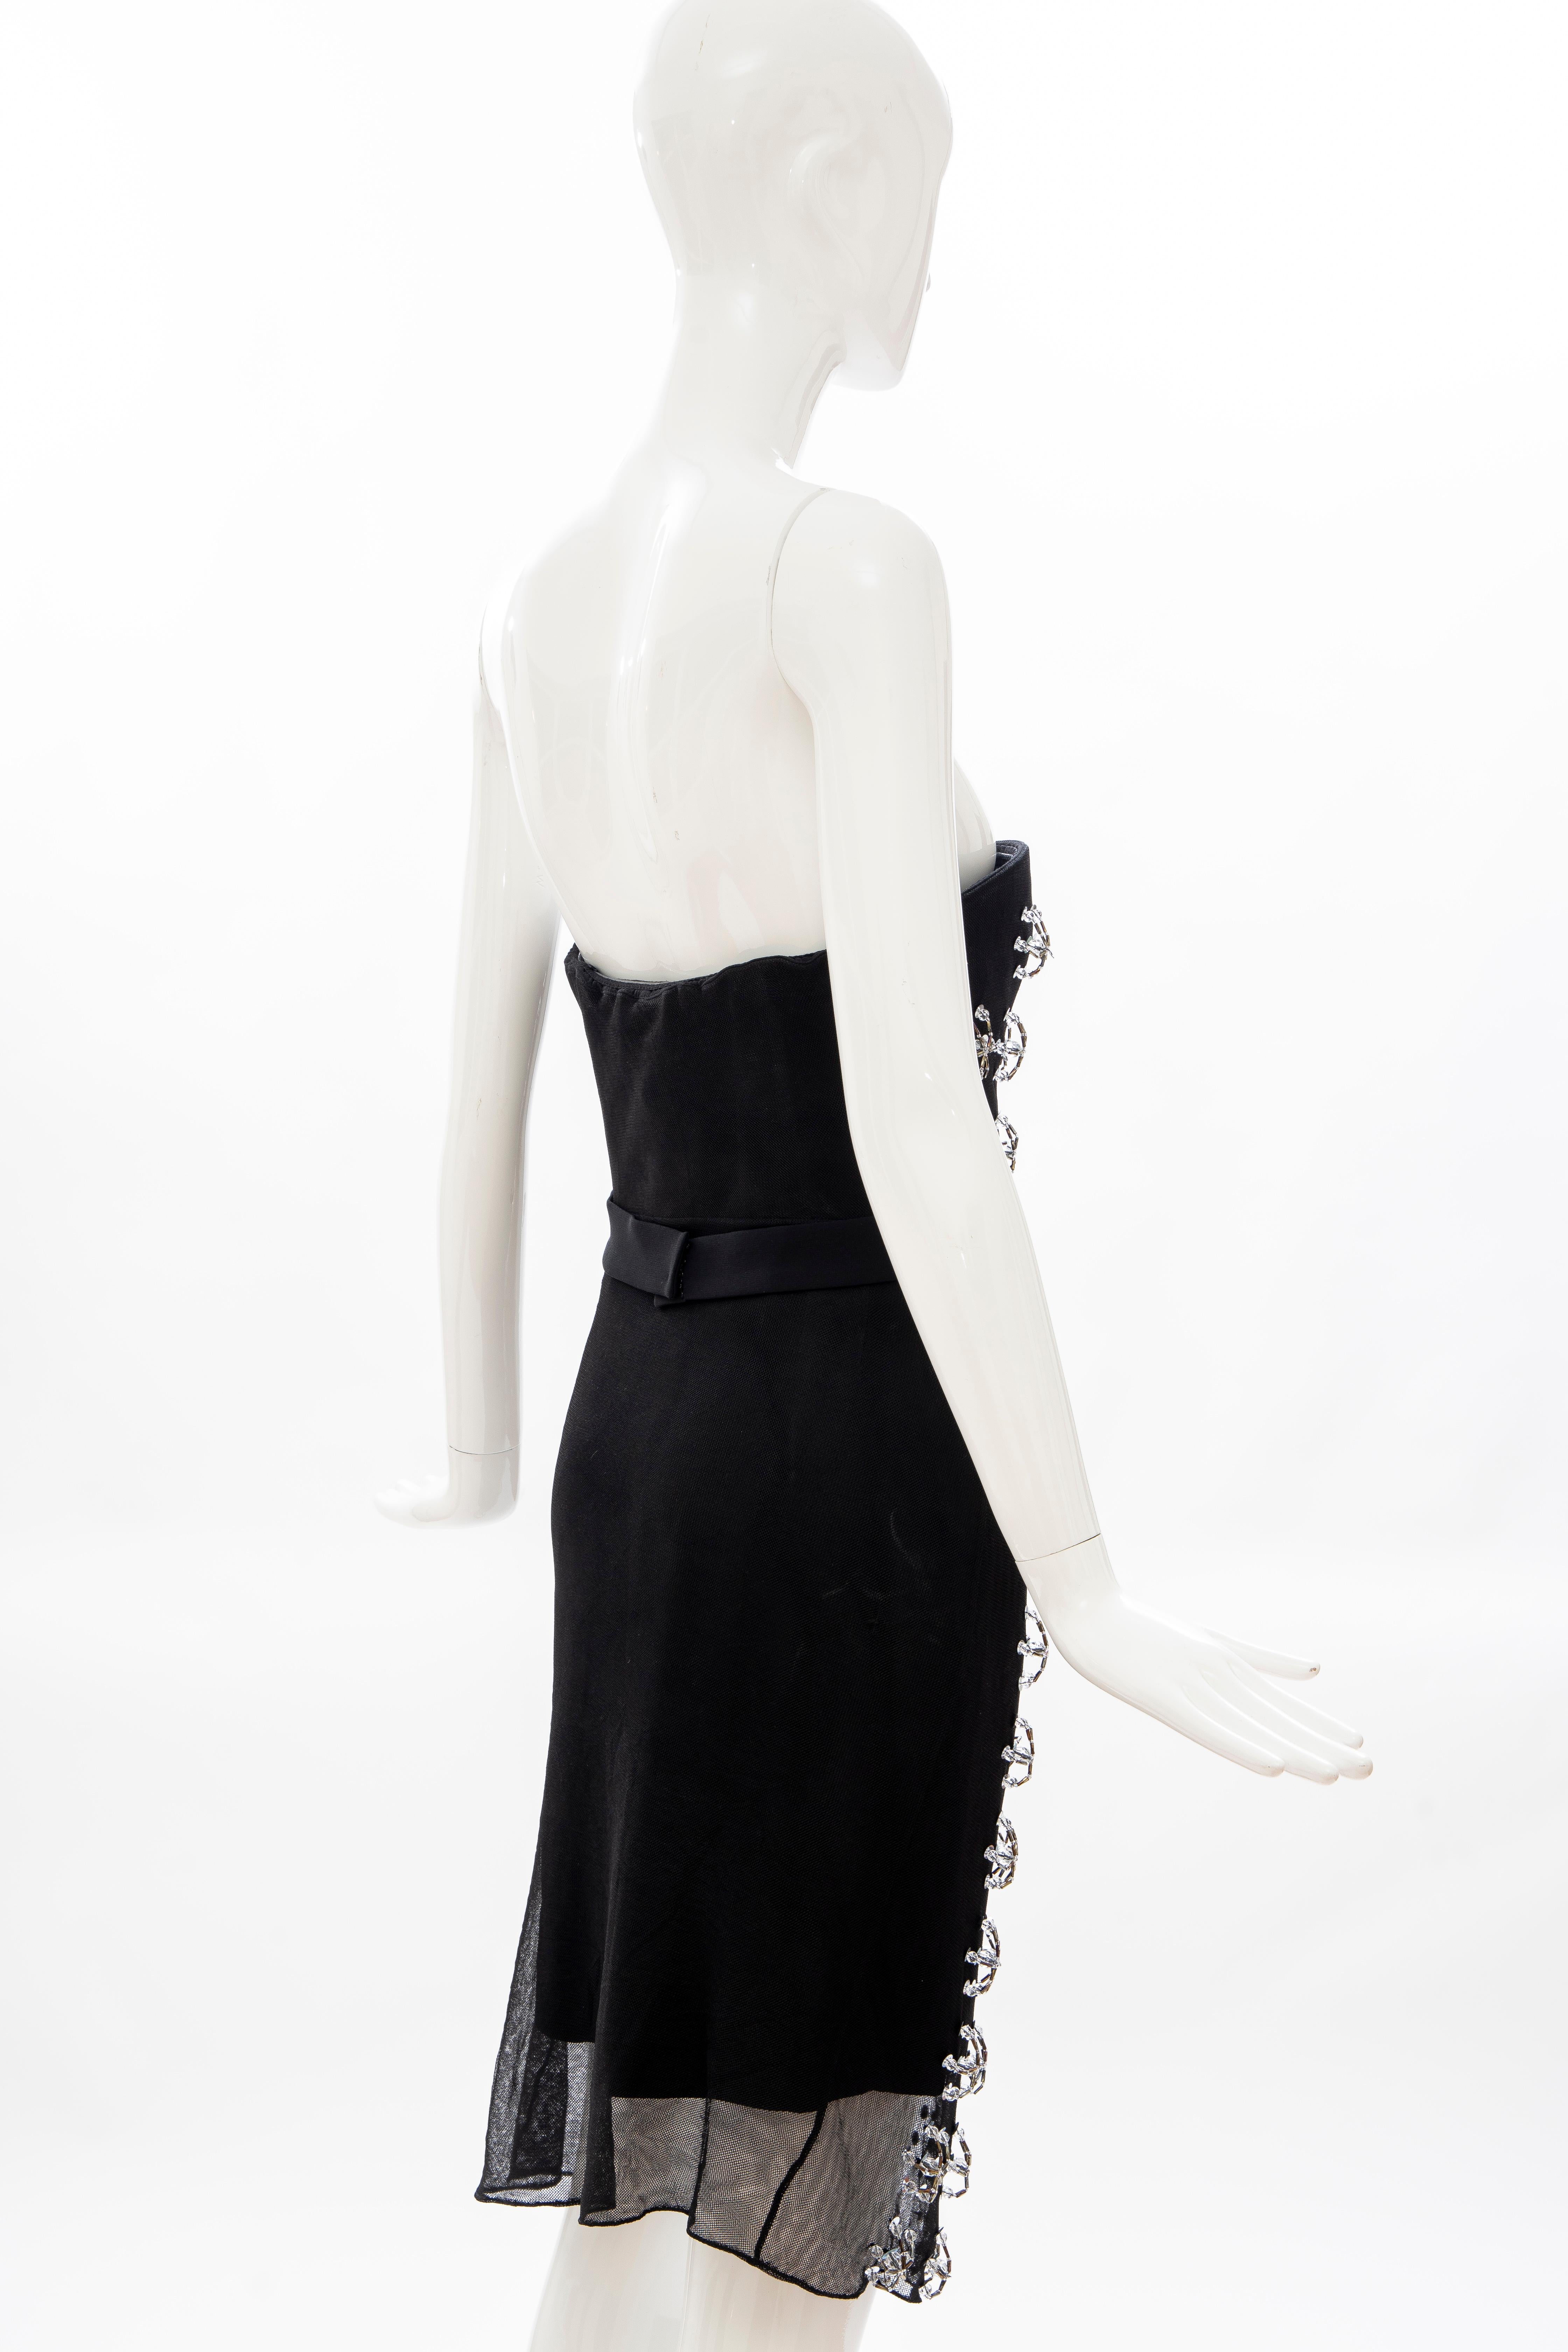 Raf Simons for Christian Dior Runway Strapless Embroidered Dress, Spring 2013 For Sale 5